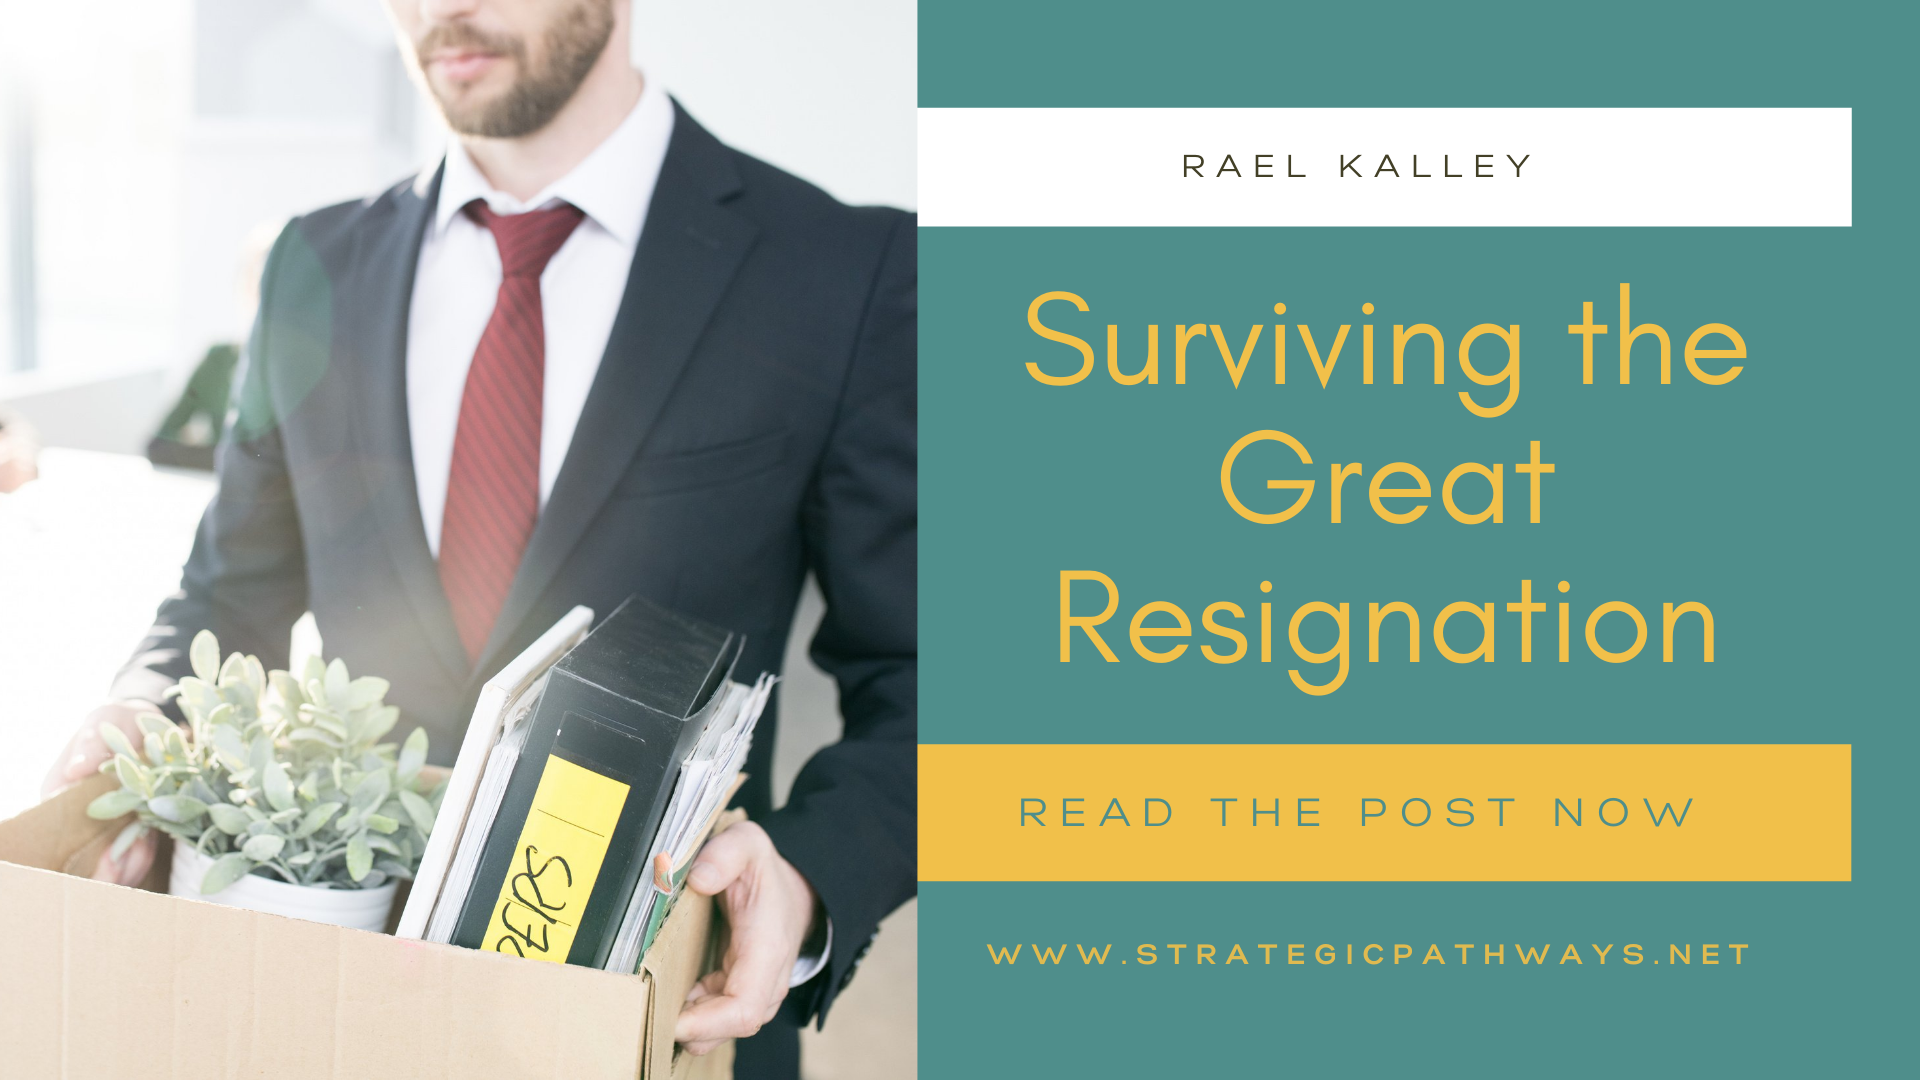 Text says "Surviving the Great Resignation" and image is a employee quitting his job